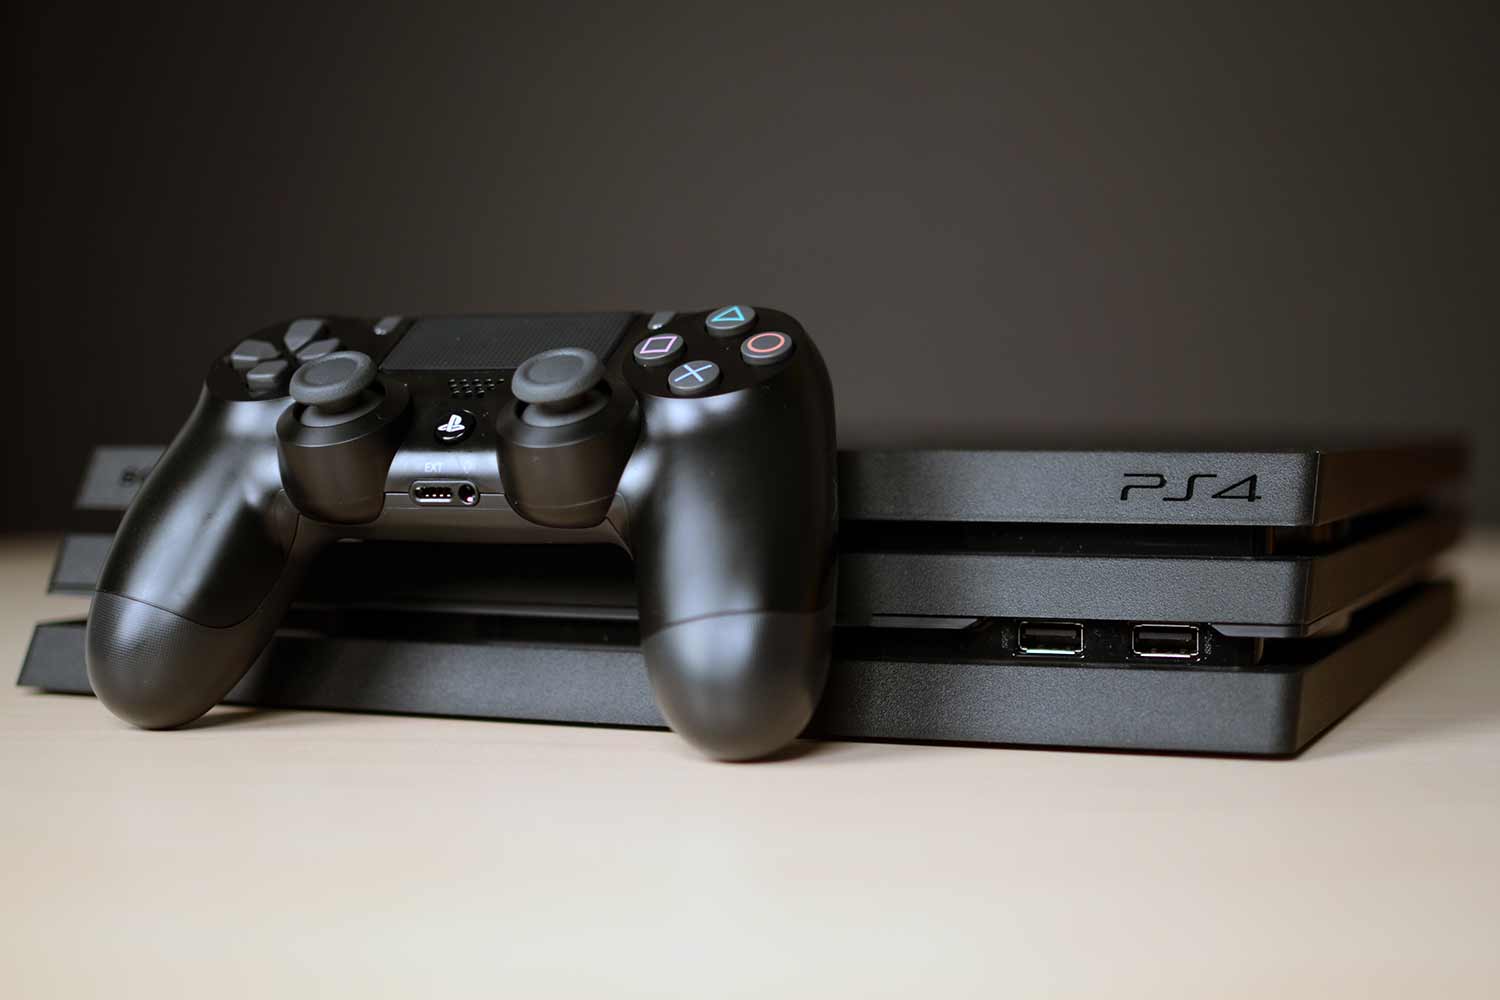 Sony PlayStation 4 Pro Review 2020: 4K at a Price | Digital Trends